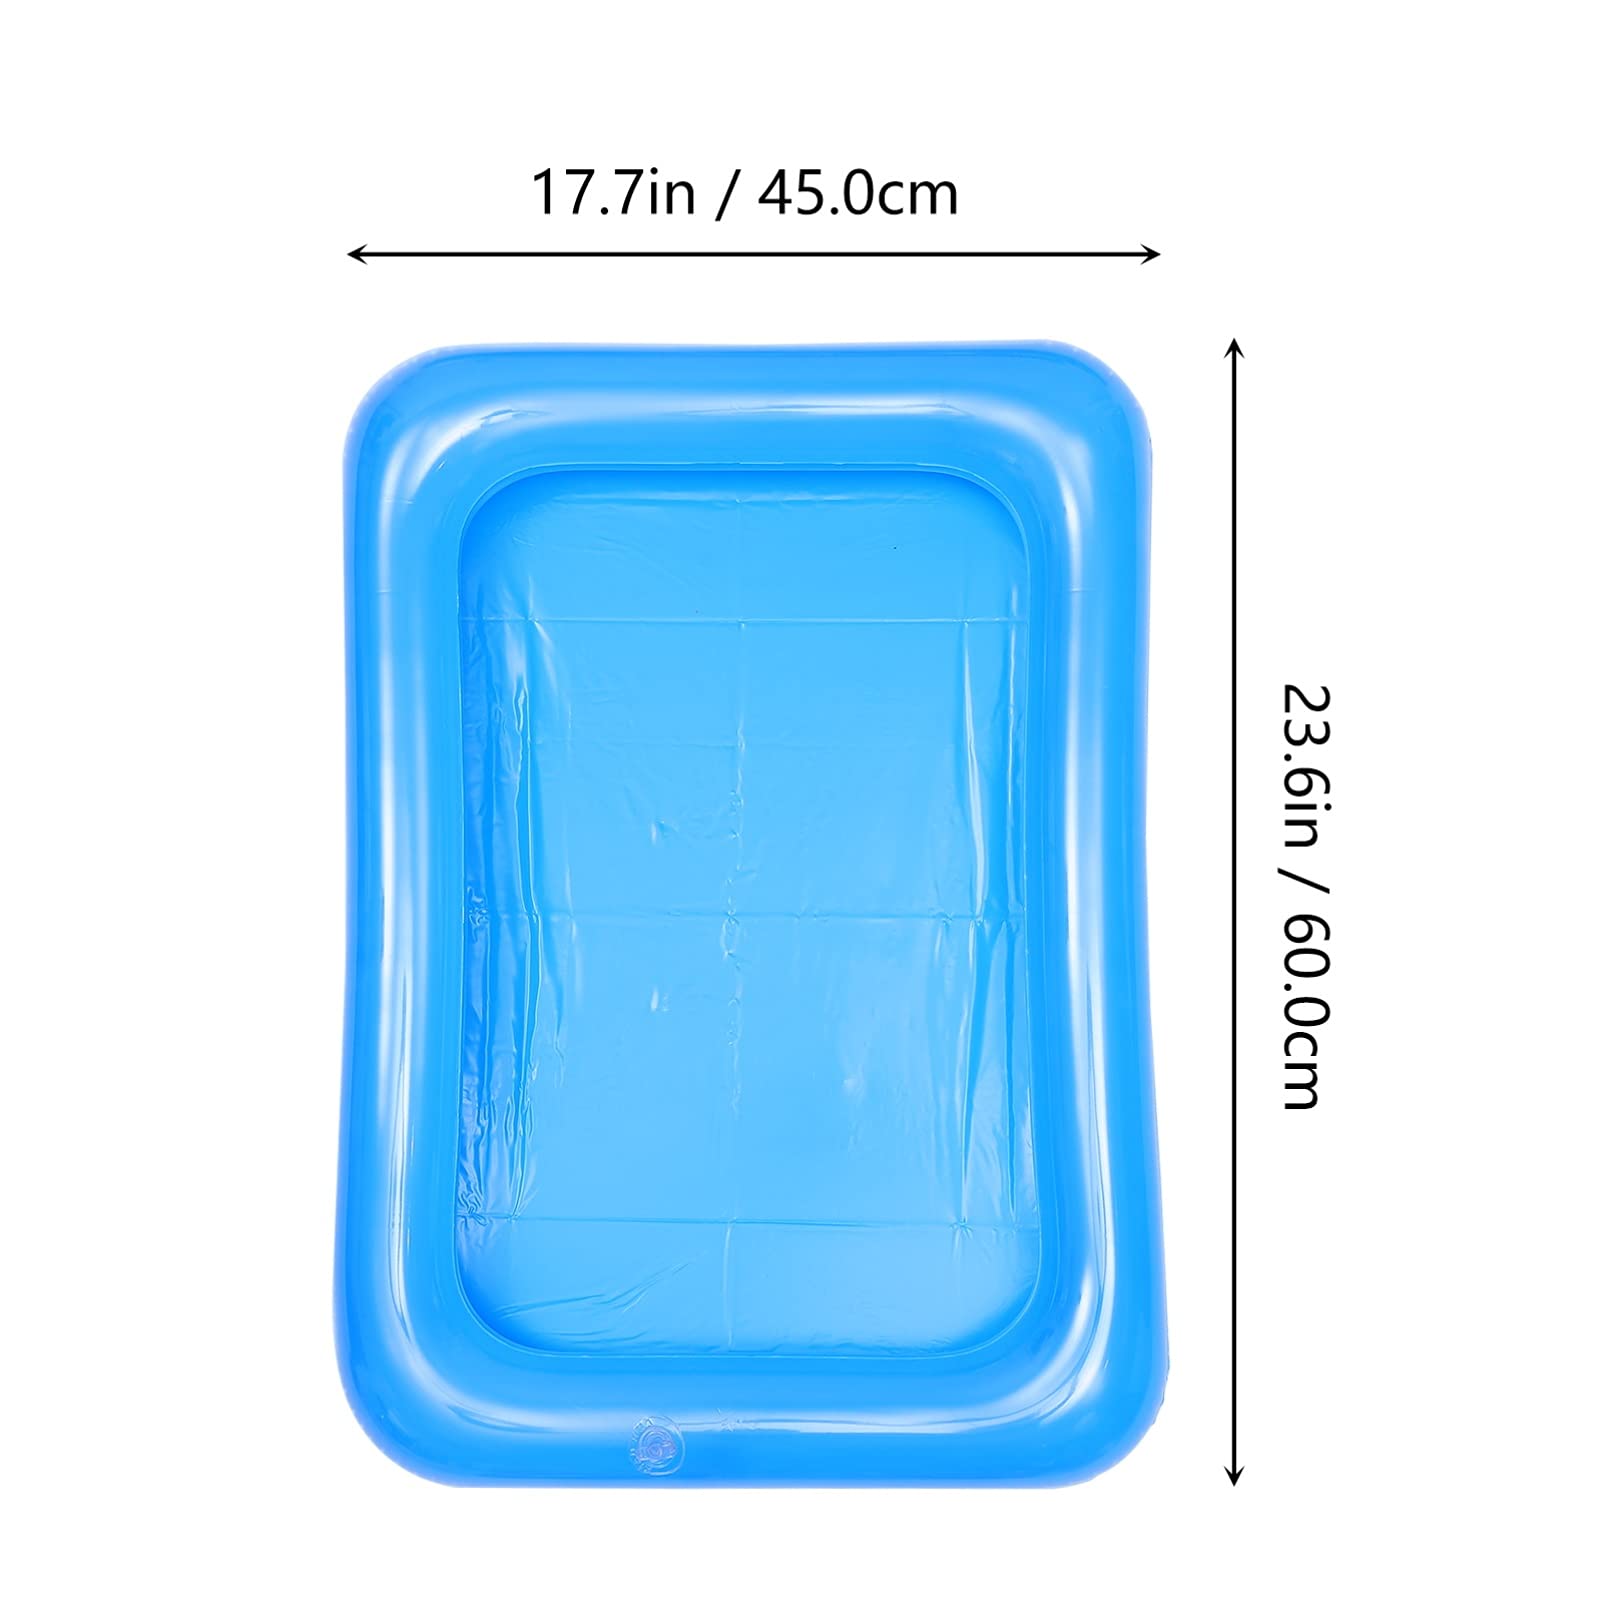 Hemoton 4pcs Inflatable Pool Serving Bar Salad Ice Tray Food Drink Containers Buffet Cooler for Pool Use Bar Party Accessories Inflatable Cooler 60x45cm